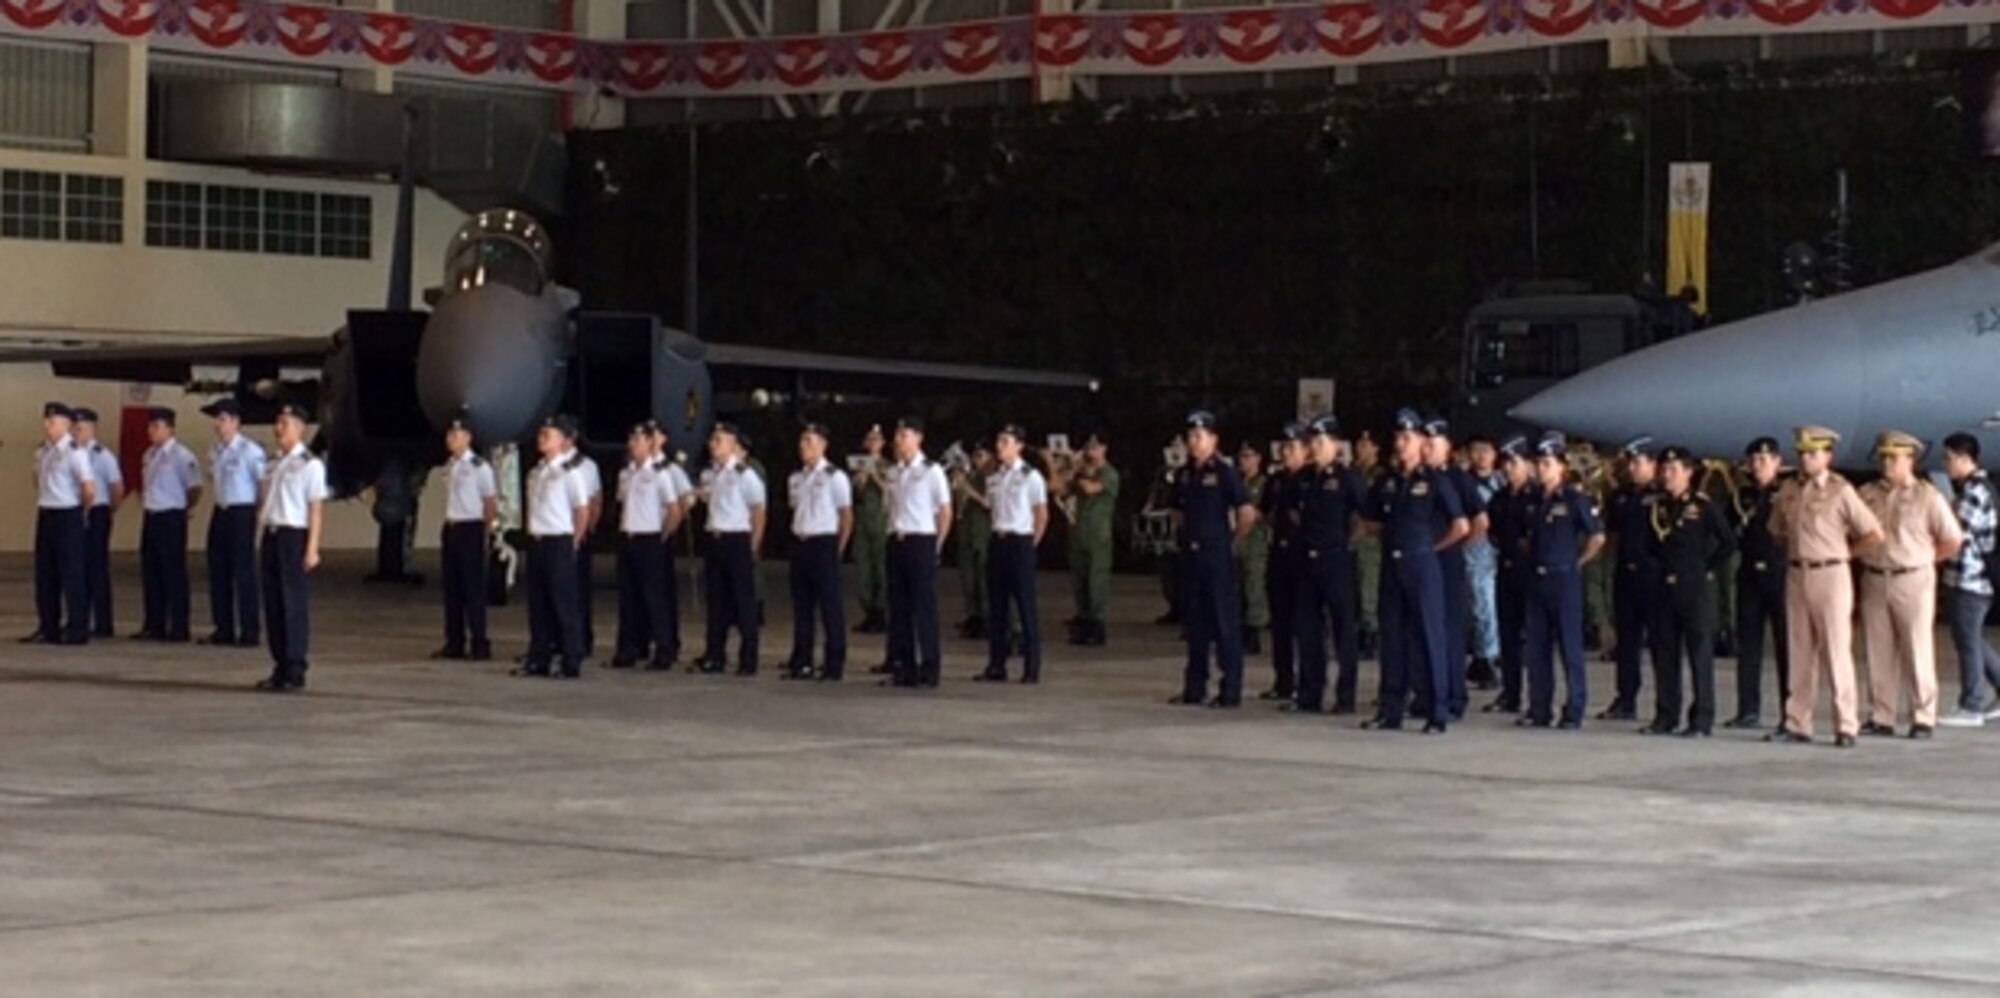 Members from the U.S. Air Force, Royal Thai air force and the Republic of Singapore air force stand in formation during the opening ceremony of exercise Cope Tiger 2016, Korat RTAF Base, Thailand, Dec. 11, 2015. The purpose of the Pacific Air Forces-sponsored field training exercise is to reinforce current relationships by improving combined readiness and interoperability among military partners in the Indo-Asia-Pacific region. (Courtesy photo)